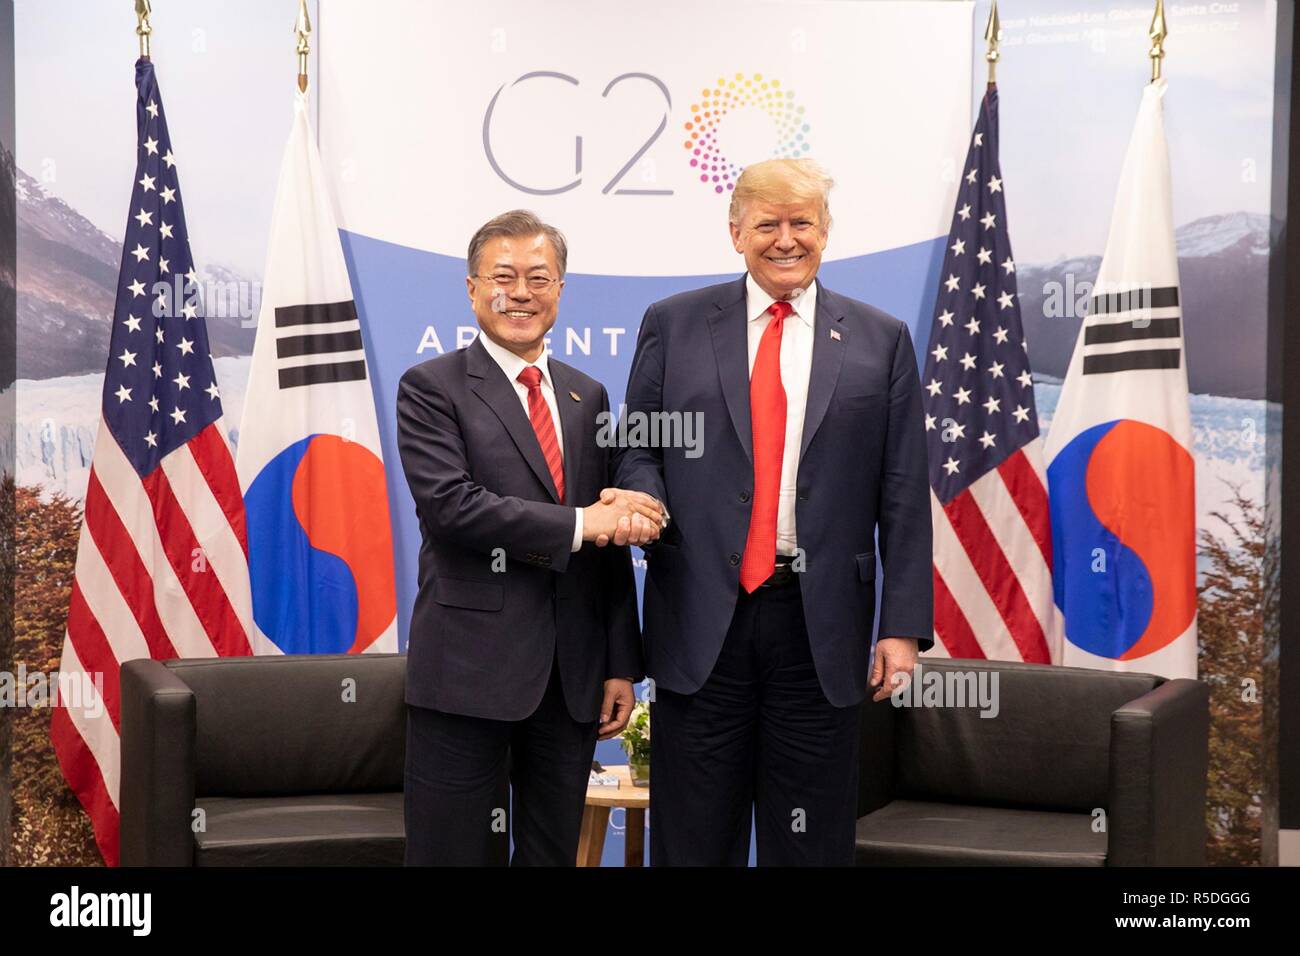 Buenos Aires, Argentina. 1st December, 2018. Buenos Aires, Argentina. 30th November 2018. U.S. President Donald Trump shakes hands with South Korean President Moon Jae-in, left, prior to their bilateral meeting on the sidelines of the G20 Summit meeting at the Costa Salguero Center November 30, 2018 in Buenos Aires, Argentina. Credit: Planetpix/Alamy Live News Credit: Planetpix/Alamy Live News Stock Photo